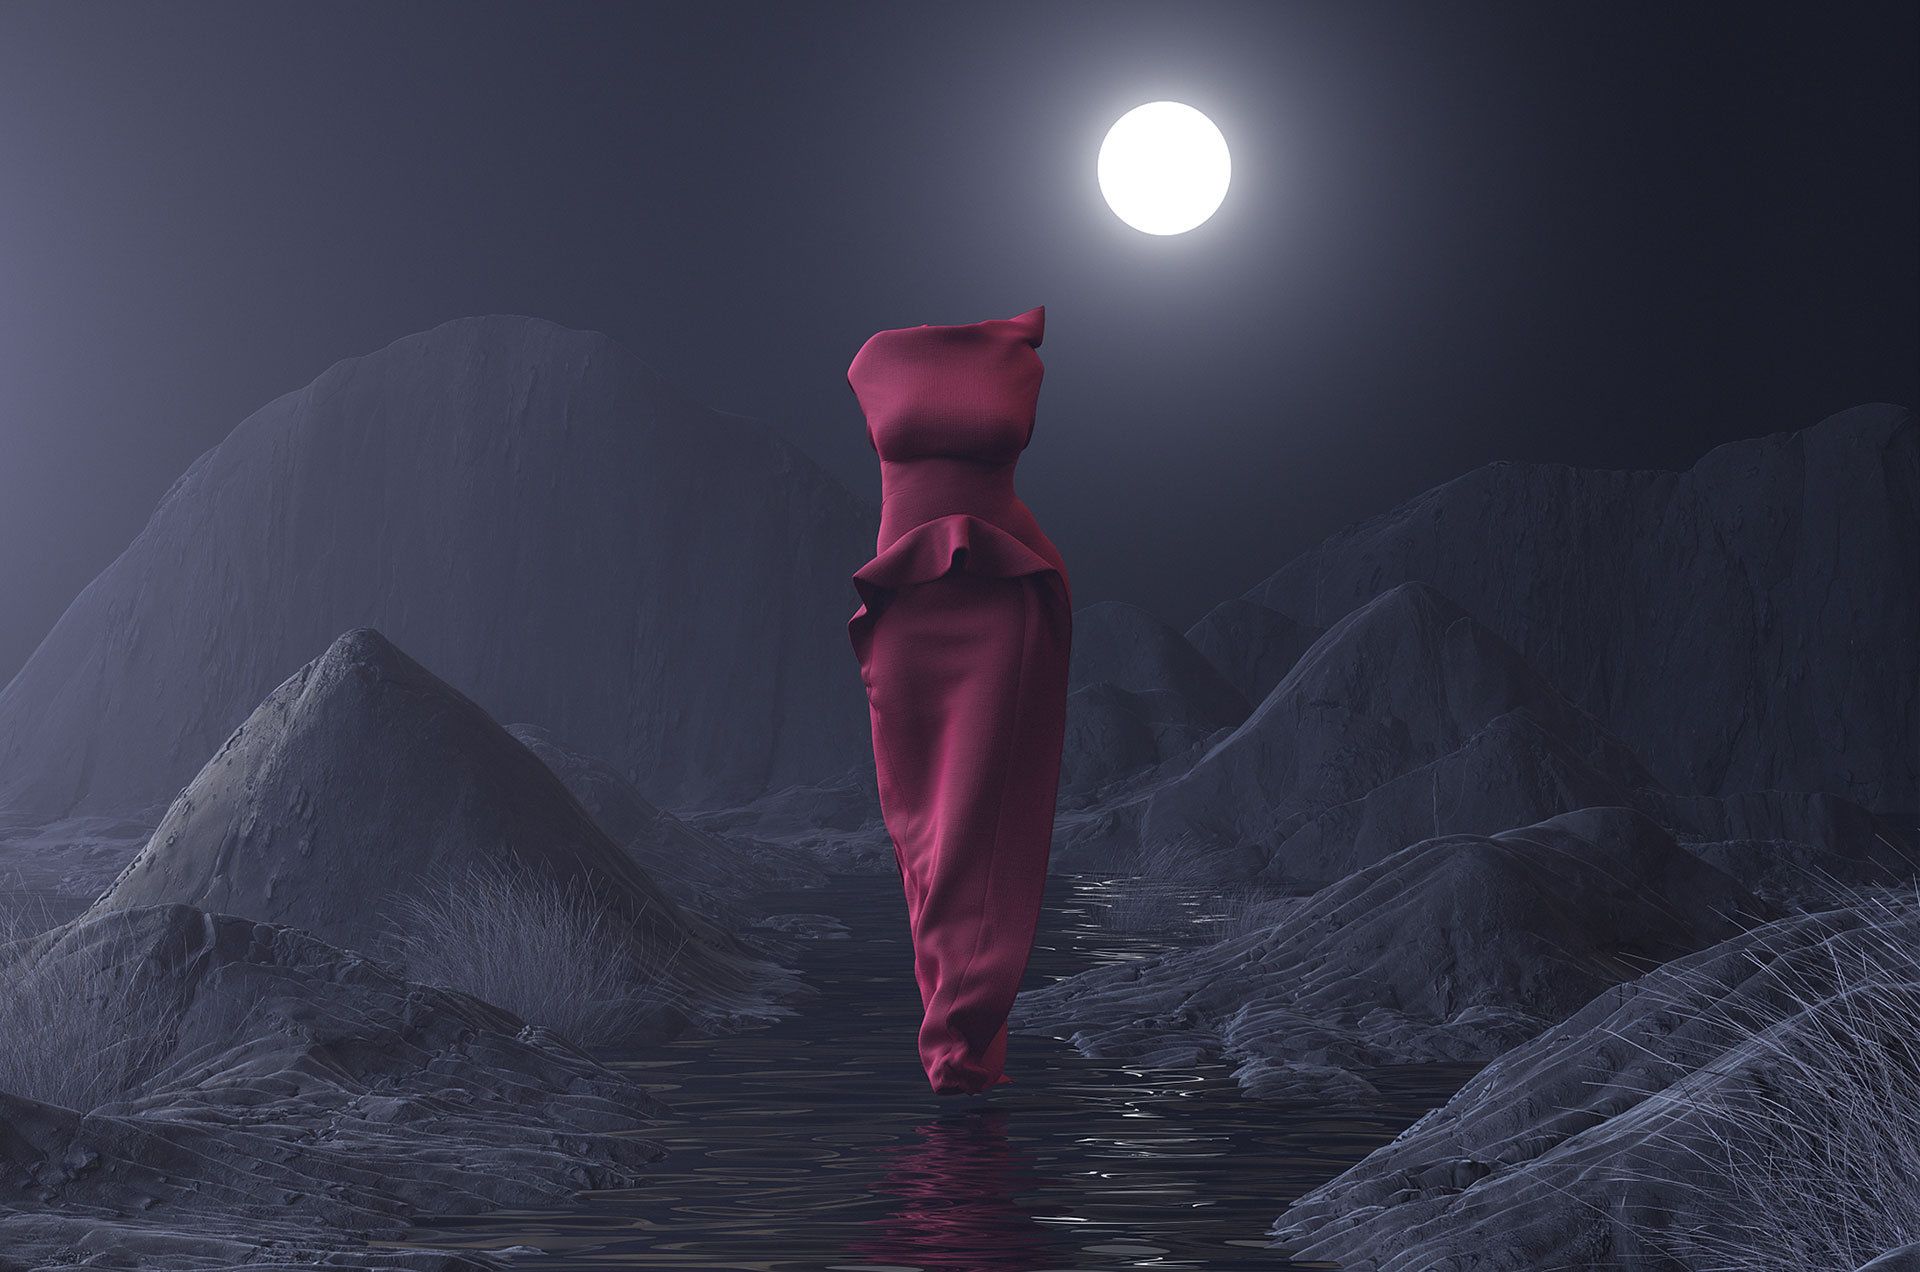 3D graphic of fashion garments walking as if worn by models through a barren futuristic landscape